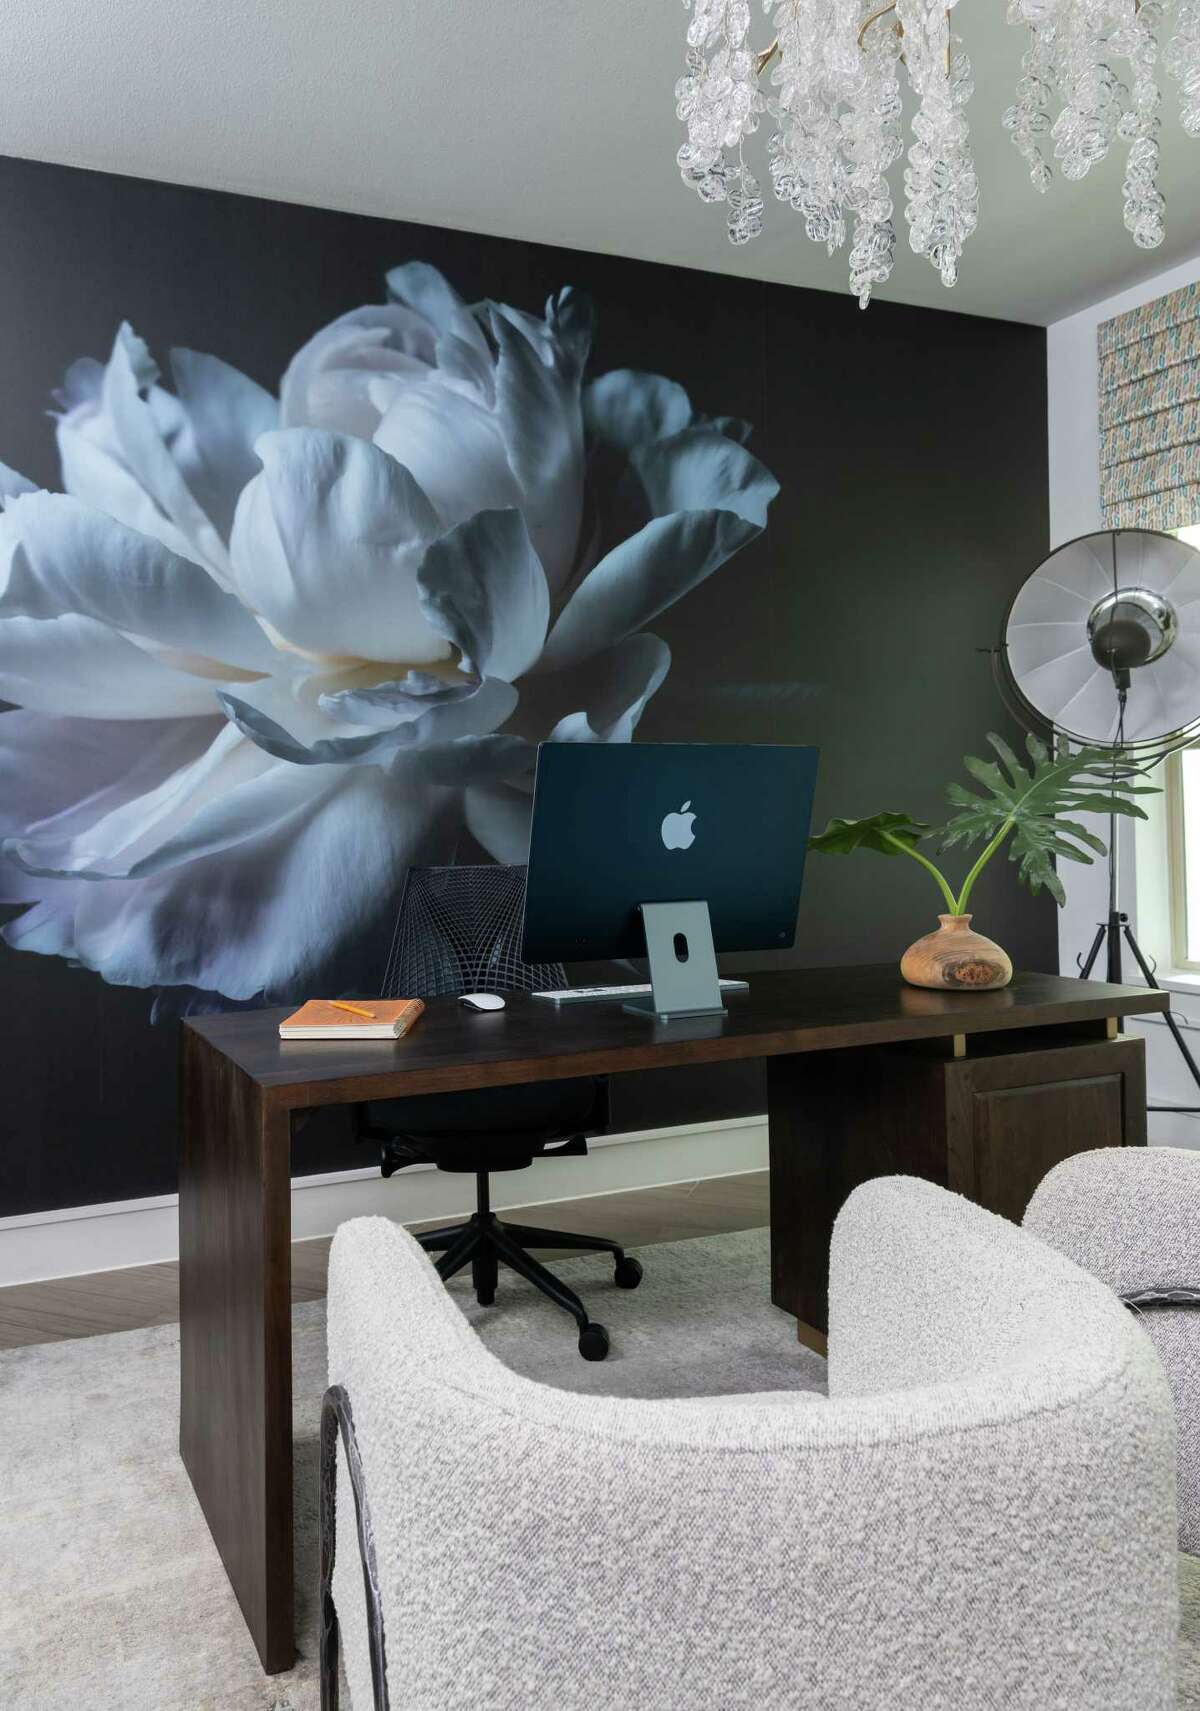 In her home office, Stewart installed a wall mural that used a photo of a large, white flower against a black background.